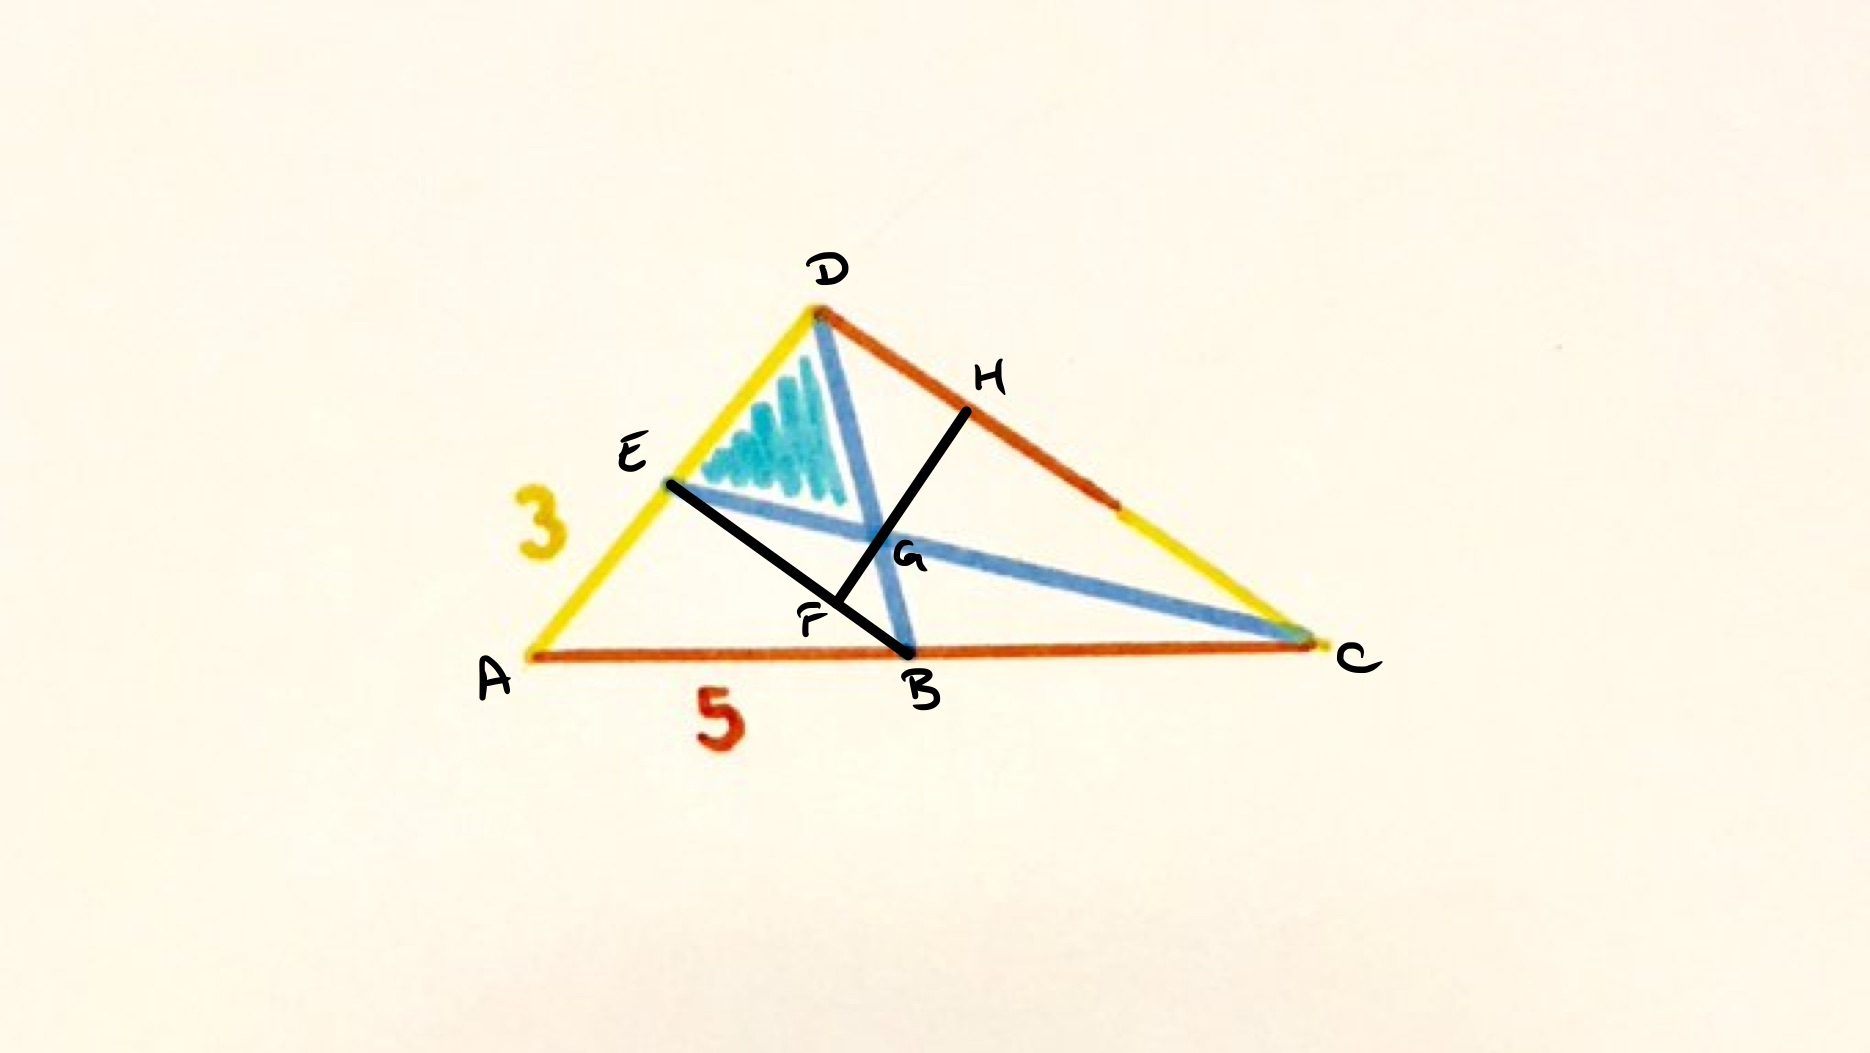 Subdivided triangle labelled